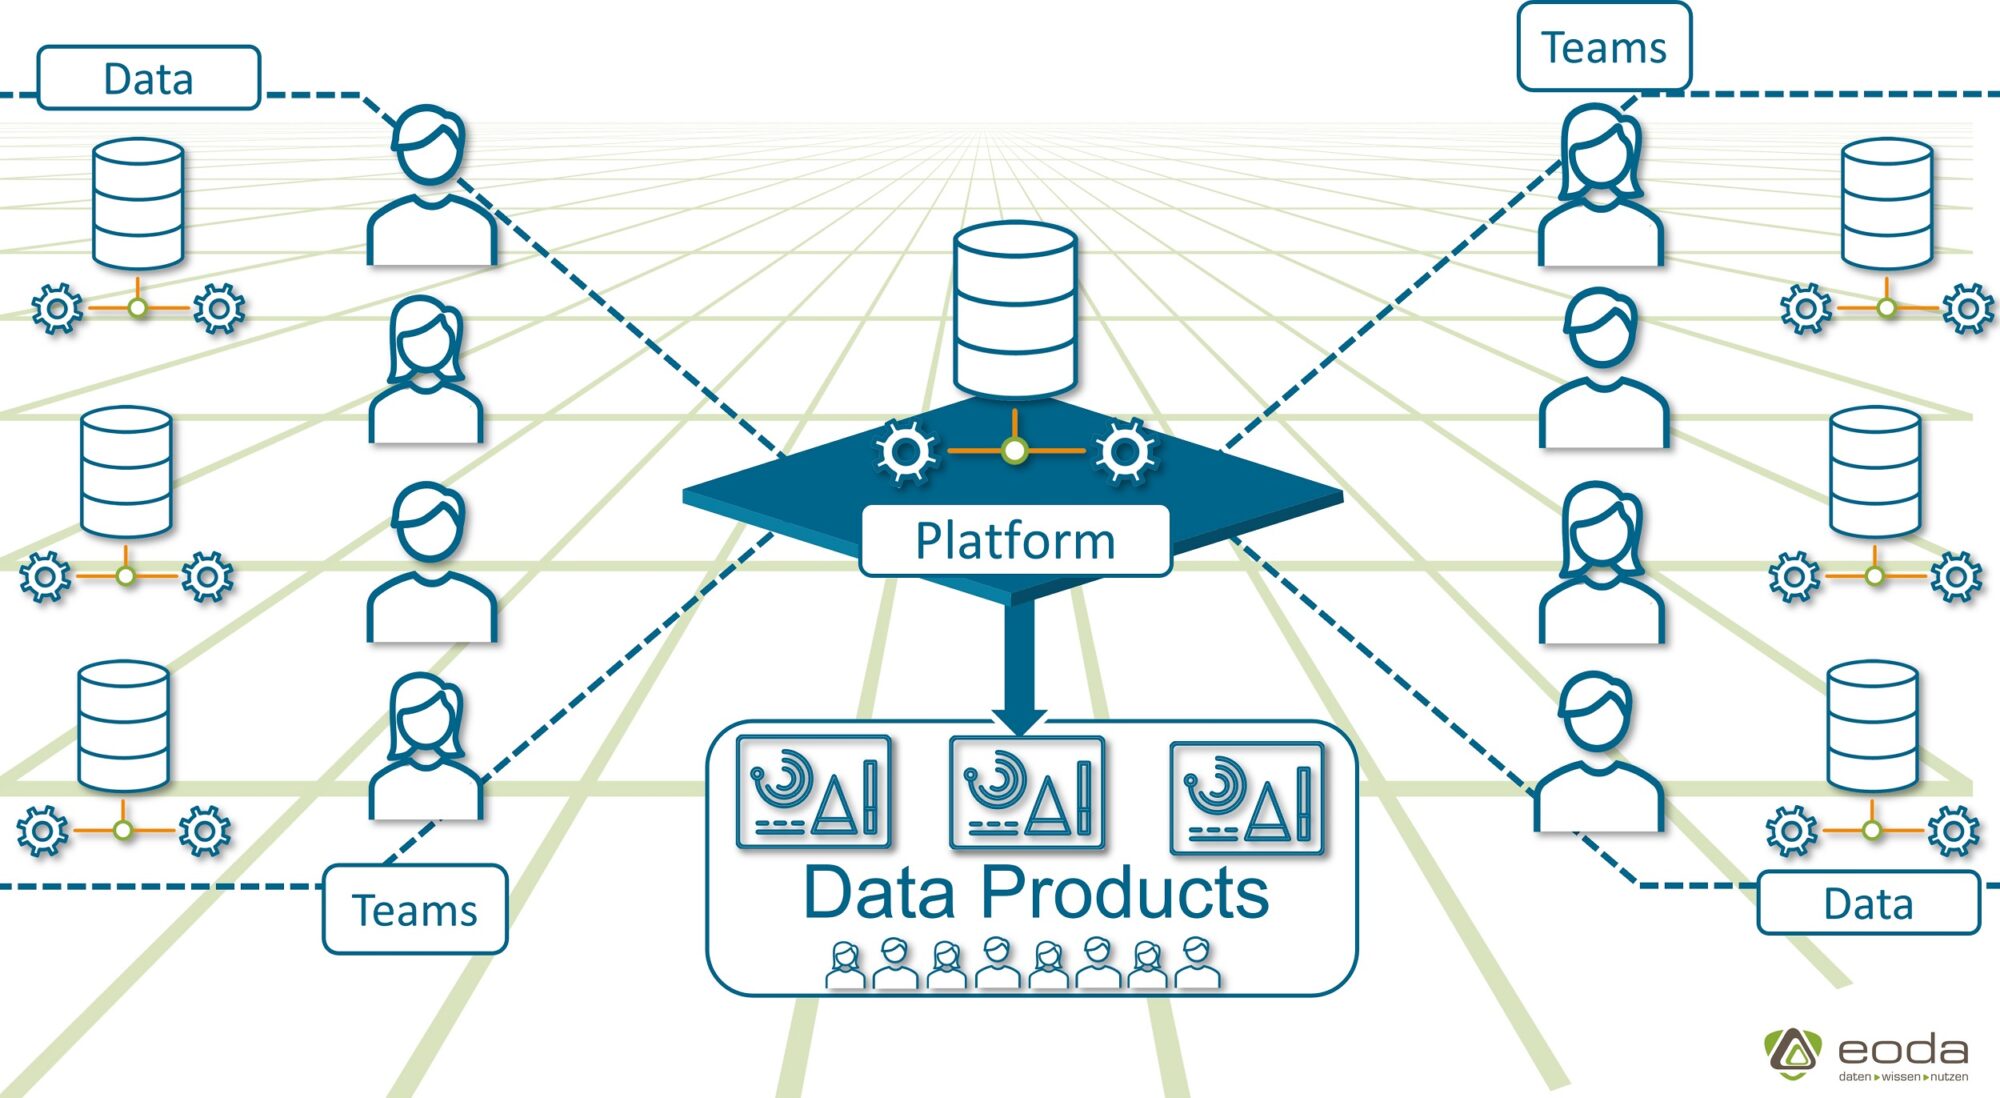 Data Mesh Visualization, right side and left side : Data Location and users that create Data Products which are located in the center, in a self service data platform 